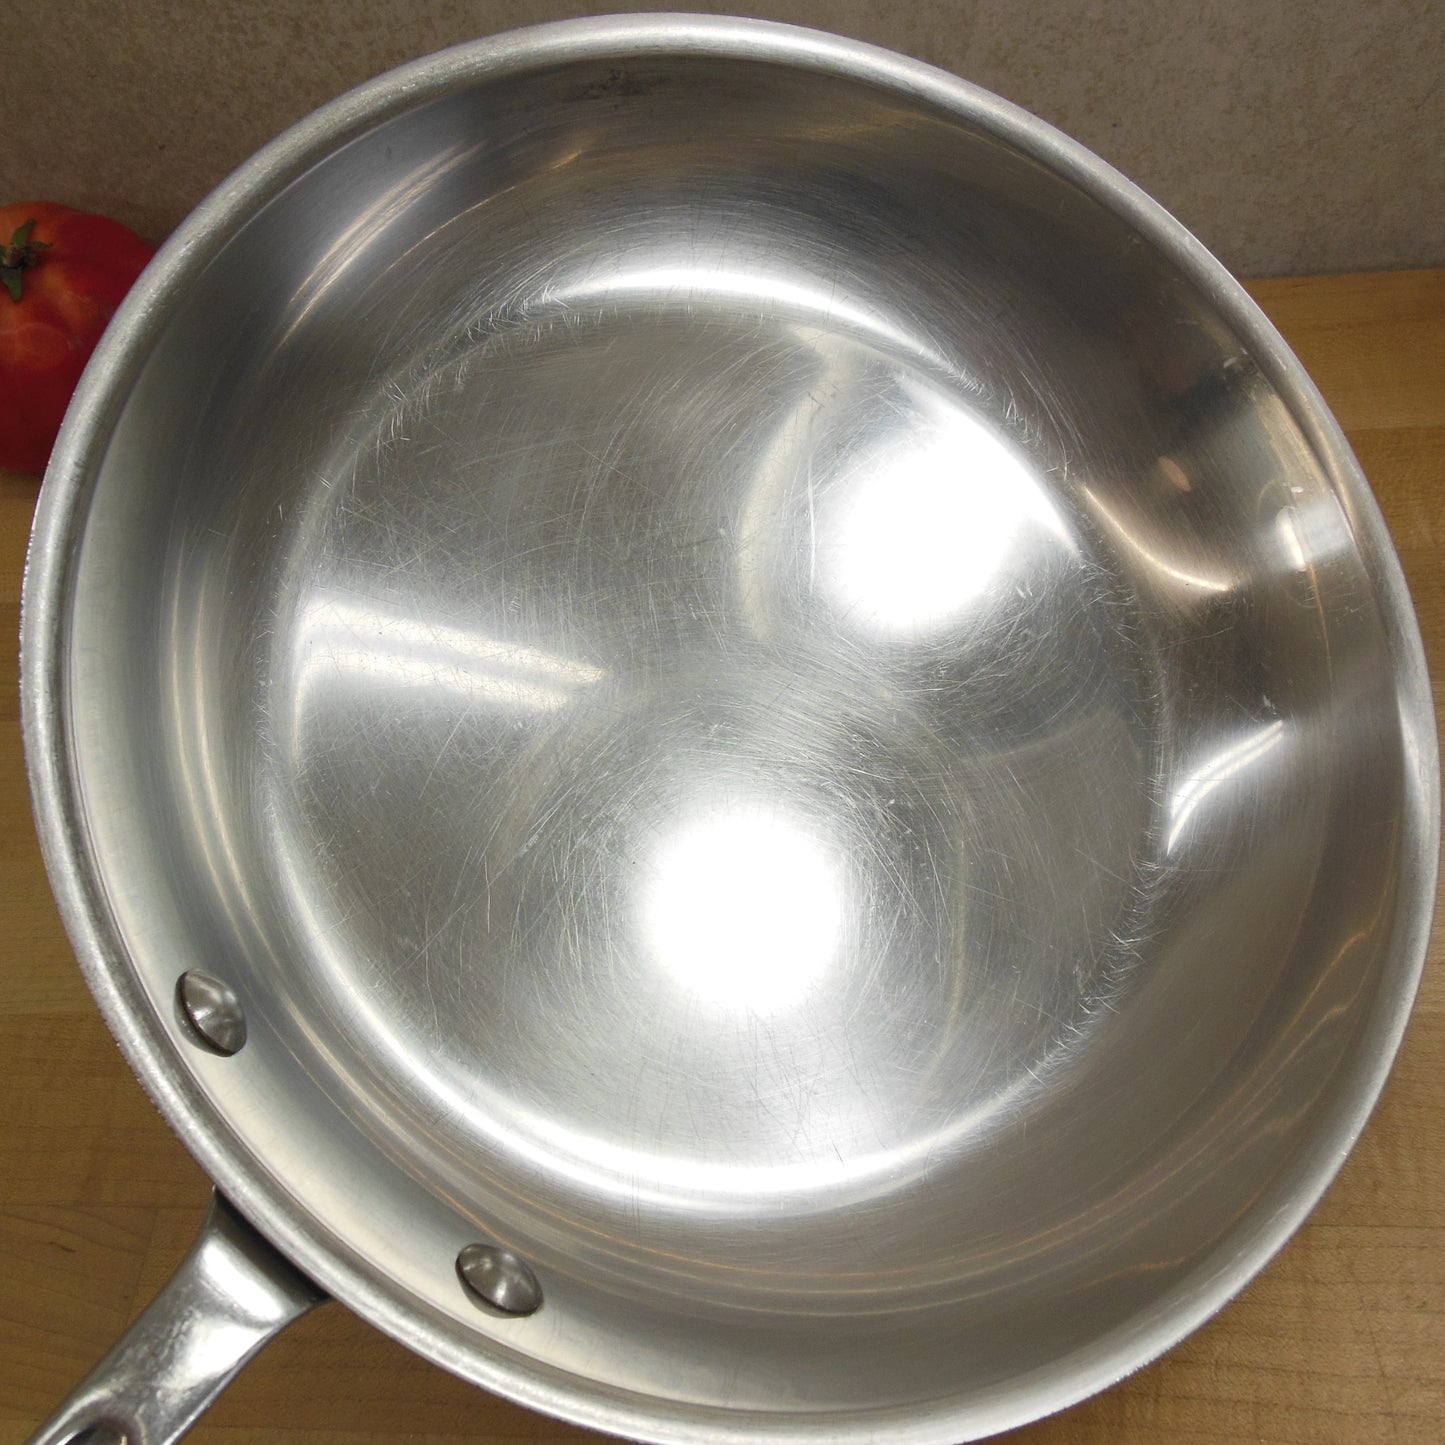 All-Clad Ltd. USA Anodized Stainless 10" Fry Pan Skillet Used